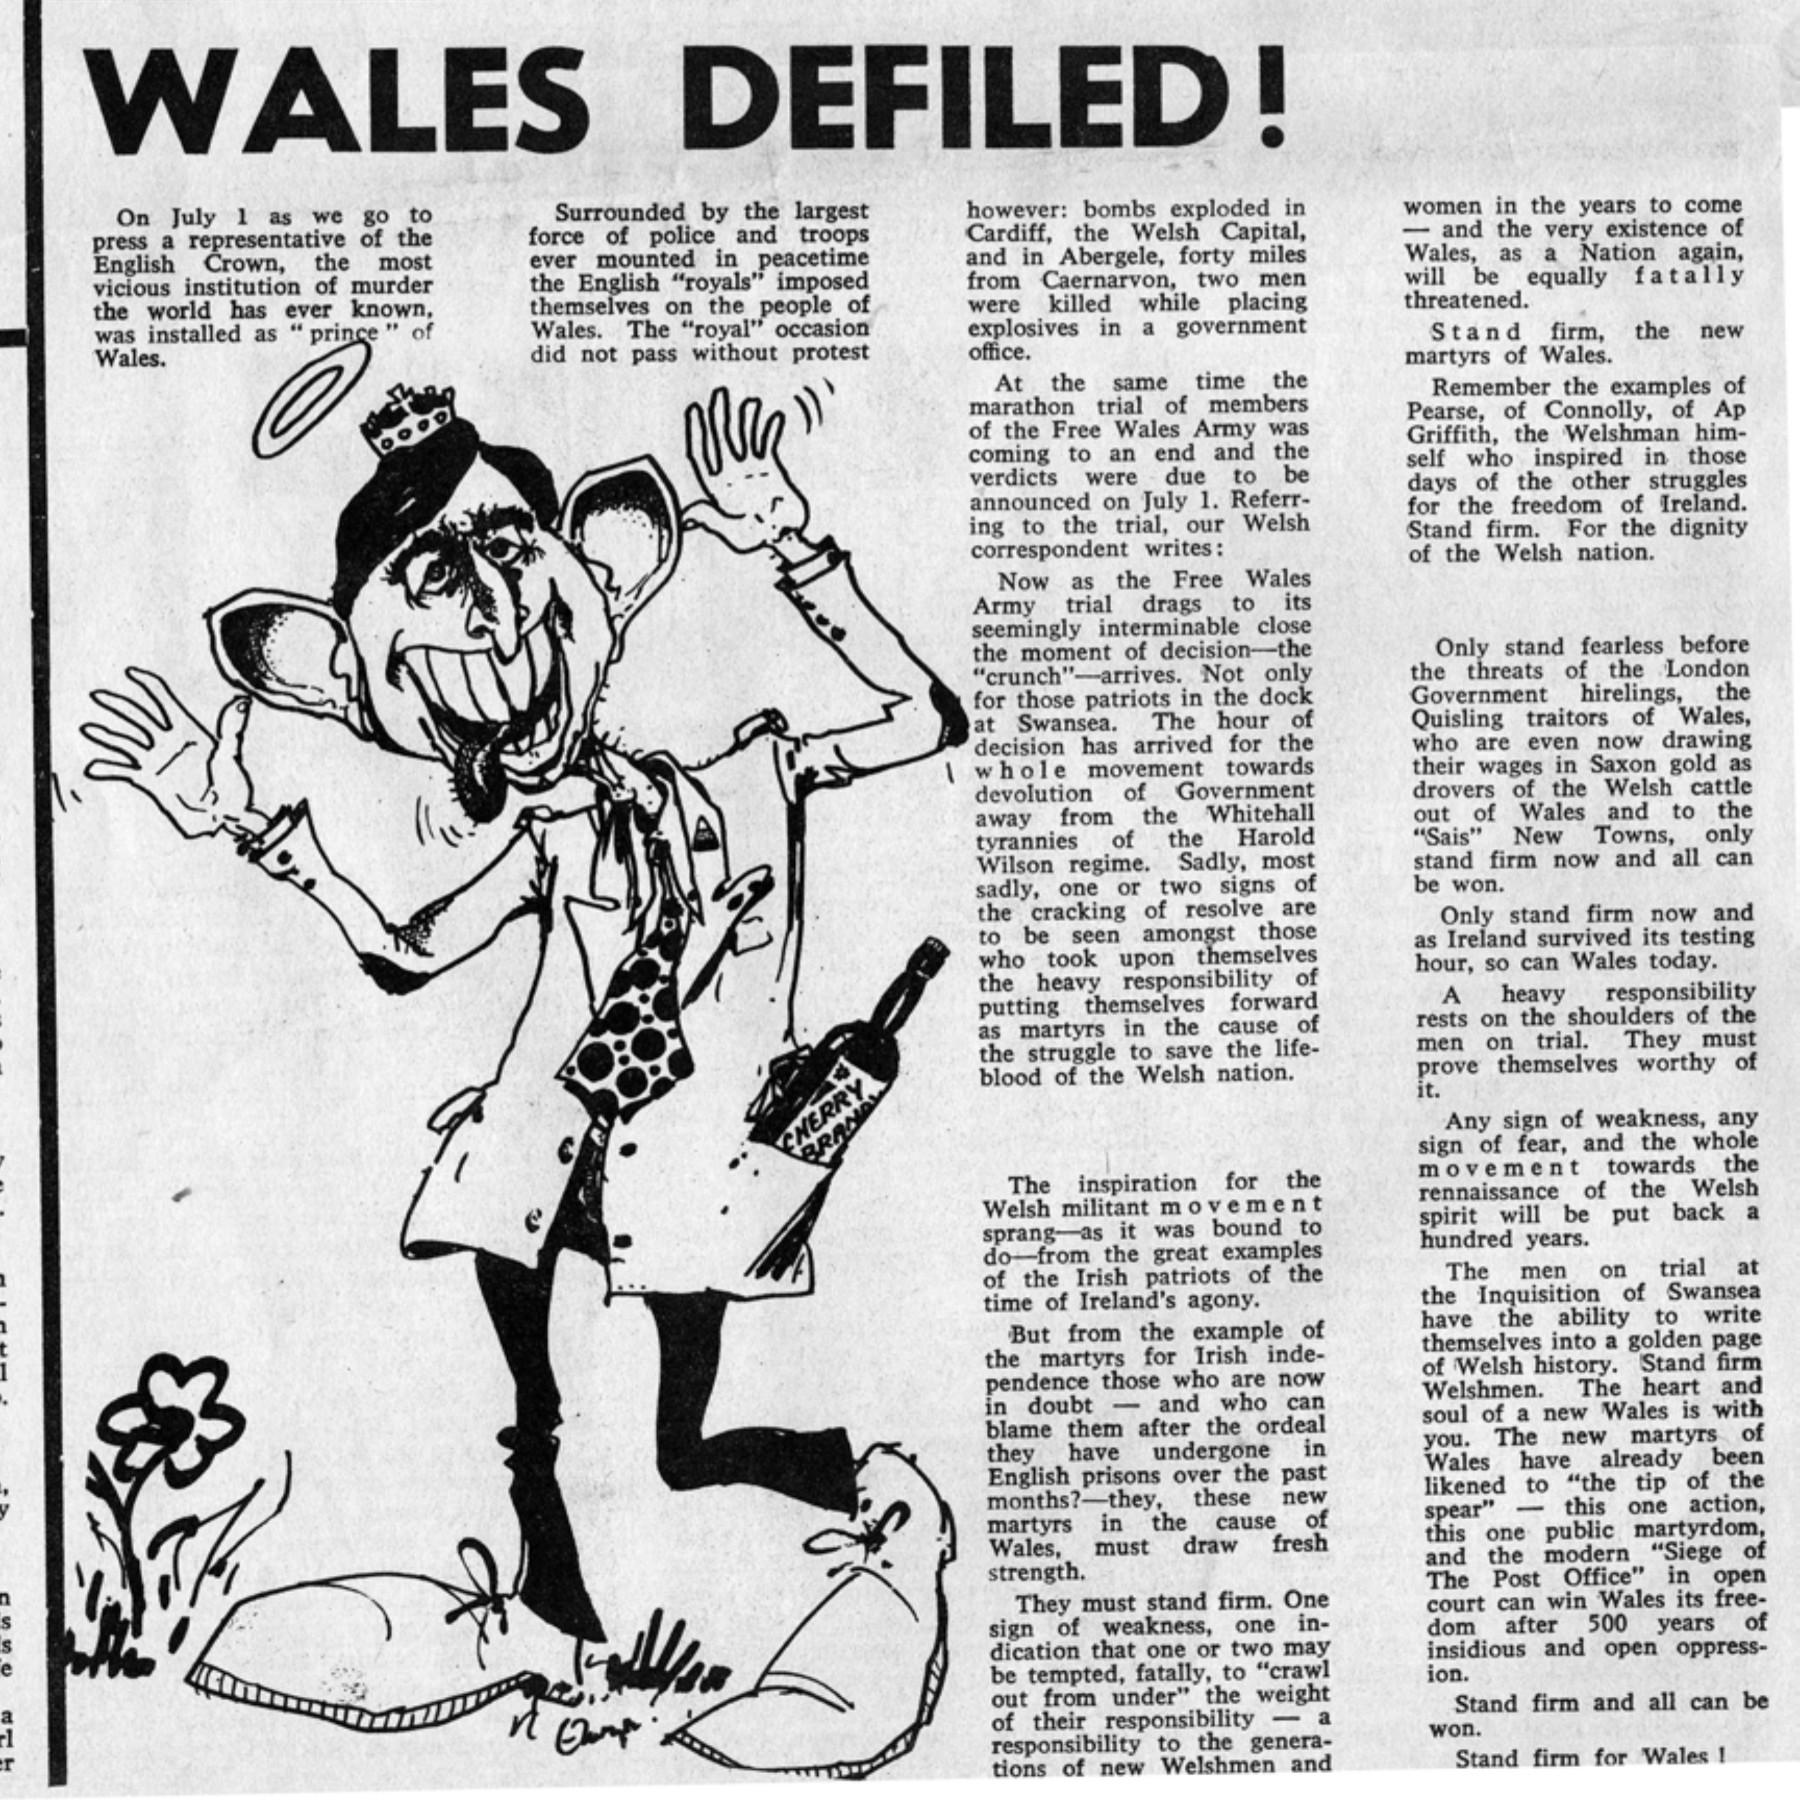 Scanned newspaper article headlined "Wales Defiled!", with a caricature image of Charles, and reading:

On July 1 as we go to press a representative of the English Crown, the most vicious institution of murder the world has ever known, was installed as "prince" of Wales.

Surrounded by the largest force of police and troops ever mounted in peacetime the English “royals” imposed themselves on the people of Wales. The “royal” occasion did not pass without protest however: bombs exploded in Cardiff, the Welsh Capital, and in Abergele, forty miles from Caernarvon, two men were killed while placing explosives in a government office.

At the same time the marathon trial of members of the Free Wales Army was coming to an end and the verdicts were due to be announced on July 1. Referring to the trial, our Welsh correspondent writes:

Now as the Free Wales Army trial drags to its seemingly interminable close the moment of decision — the “crunch” — arrives. Not only for those patriots in the dock at Swansea. The hour of decision has arrived for the whole movement towards devolution of Government away from the Whitehall tyrannies of the Harold Wilson regime. Sadly, most sadly, one or two signs of the cracking of resolve are to be seen amongst those who took upon themselves the heavy responsibility of putting themselves forward as martyrs in the cause of the struggle to save the lifeblood of the Welsh nation.

The inspiration for the Welsh militant movement sprang — as it was bound to do — from the great examples of the Irish patriots of the time of Ireland’s agony.

 But from the example of the martyrs for Irish independence those who are now in doubt — and who can blame them after the ordeal they have undergone in English prisons over the past months? — they, these new martyrs in the cause of Wales, must draw fresh strength.

They must stand firm. One sign of weakness, one indication that one or two may be tempted, fatally, to “crawl out from under” the weight of their responsibility — a responsibility to the generations of new Welshmen and women in the years to come — and the very existence of Wales, as a Nation again, will be equally fatally threatened.

Stand firm, the new martyrs of Wales.

Remember the examples of Pearse, of Connolly, of Ap Griffith, the Welshman him self who inspired in those days of the other struggles for the freedom of Ireland. Stand firm. For the dignity of the Welsh nation.

Only stand fearless before the threats of the London Government hirelings, the Quisling traitors of Wales, who are even now drawing their wages in Saxon gold as drovers of the Welsh cattle out of Wales and to the "Sais“ New Towns, only stand firm now all can be won.

Only stand firm now and as Ireland survived its testing hour, so can Wales today.

A heavy responsibility rests on the shoulders of the men on trial. They must prove themselves worthy of it.

Any sign of weakness, any sign of fear, and the whole movement towards the rennaissance [sic] of the Welsh spirit will be put back a hundred years.

The men on trial at the Inquisition of Swansea have the ability to write themselves into a golden page of Welsh history. Stand firm Welshmen. The heart and soul of a new Wales is with you. The new martyrs of Wales have already been likened to “the tip of the spear” — this one action, this one public martyrdom, and the modern “Siege of The Post Office" in open court can win Wales its freedom after 500 years of insidious and open oppression.

Stand firm and all can be won.

Stand firm for Wales!